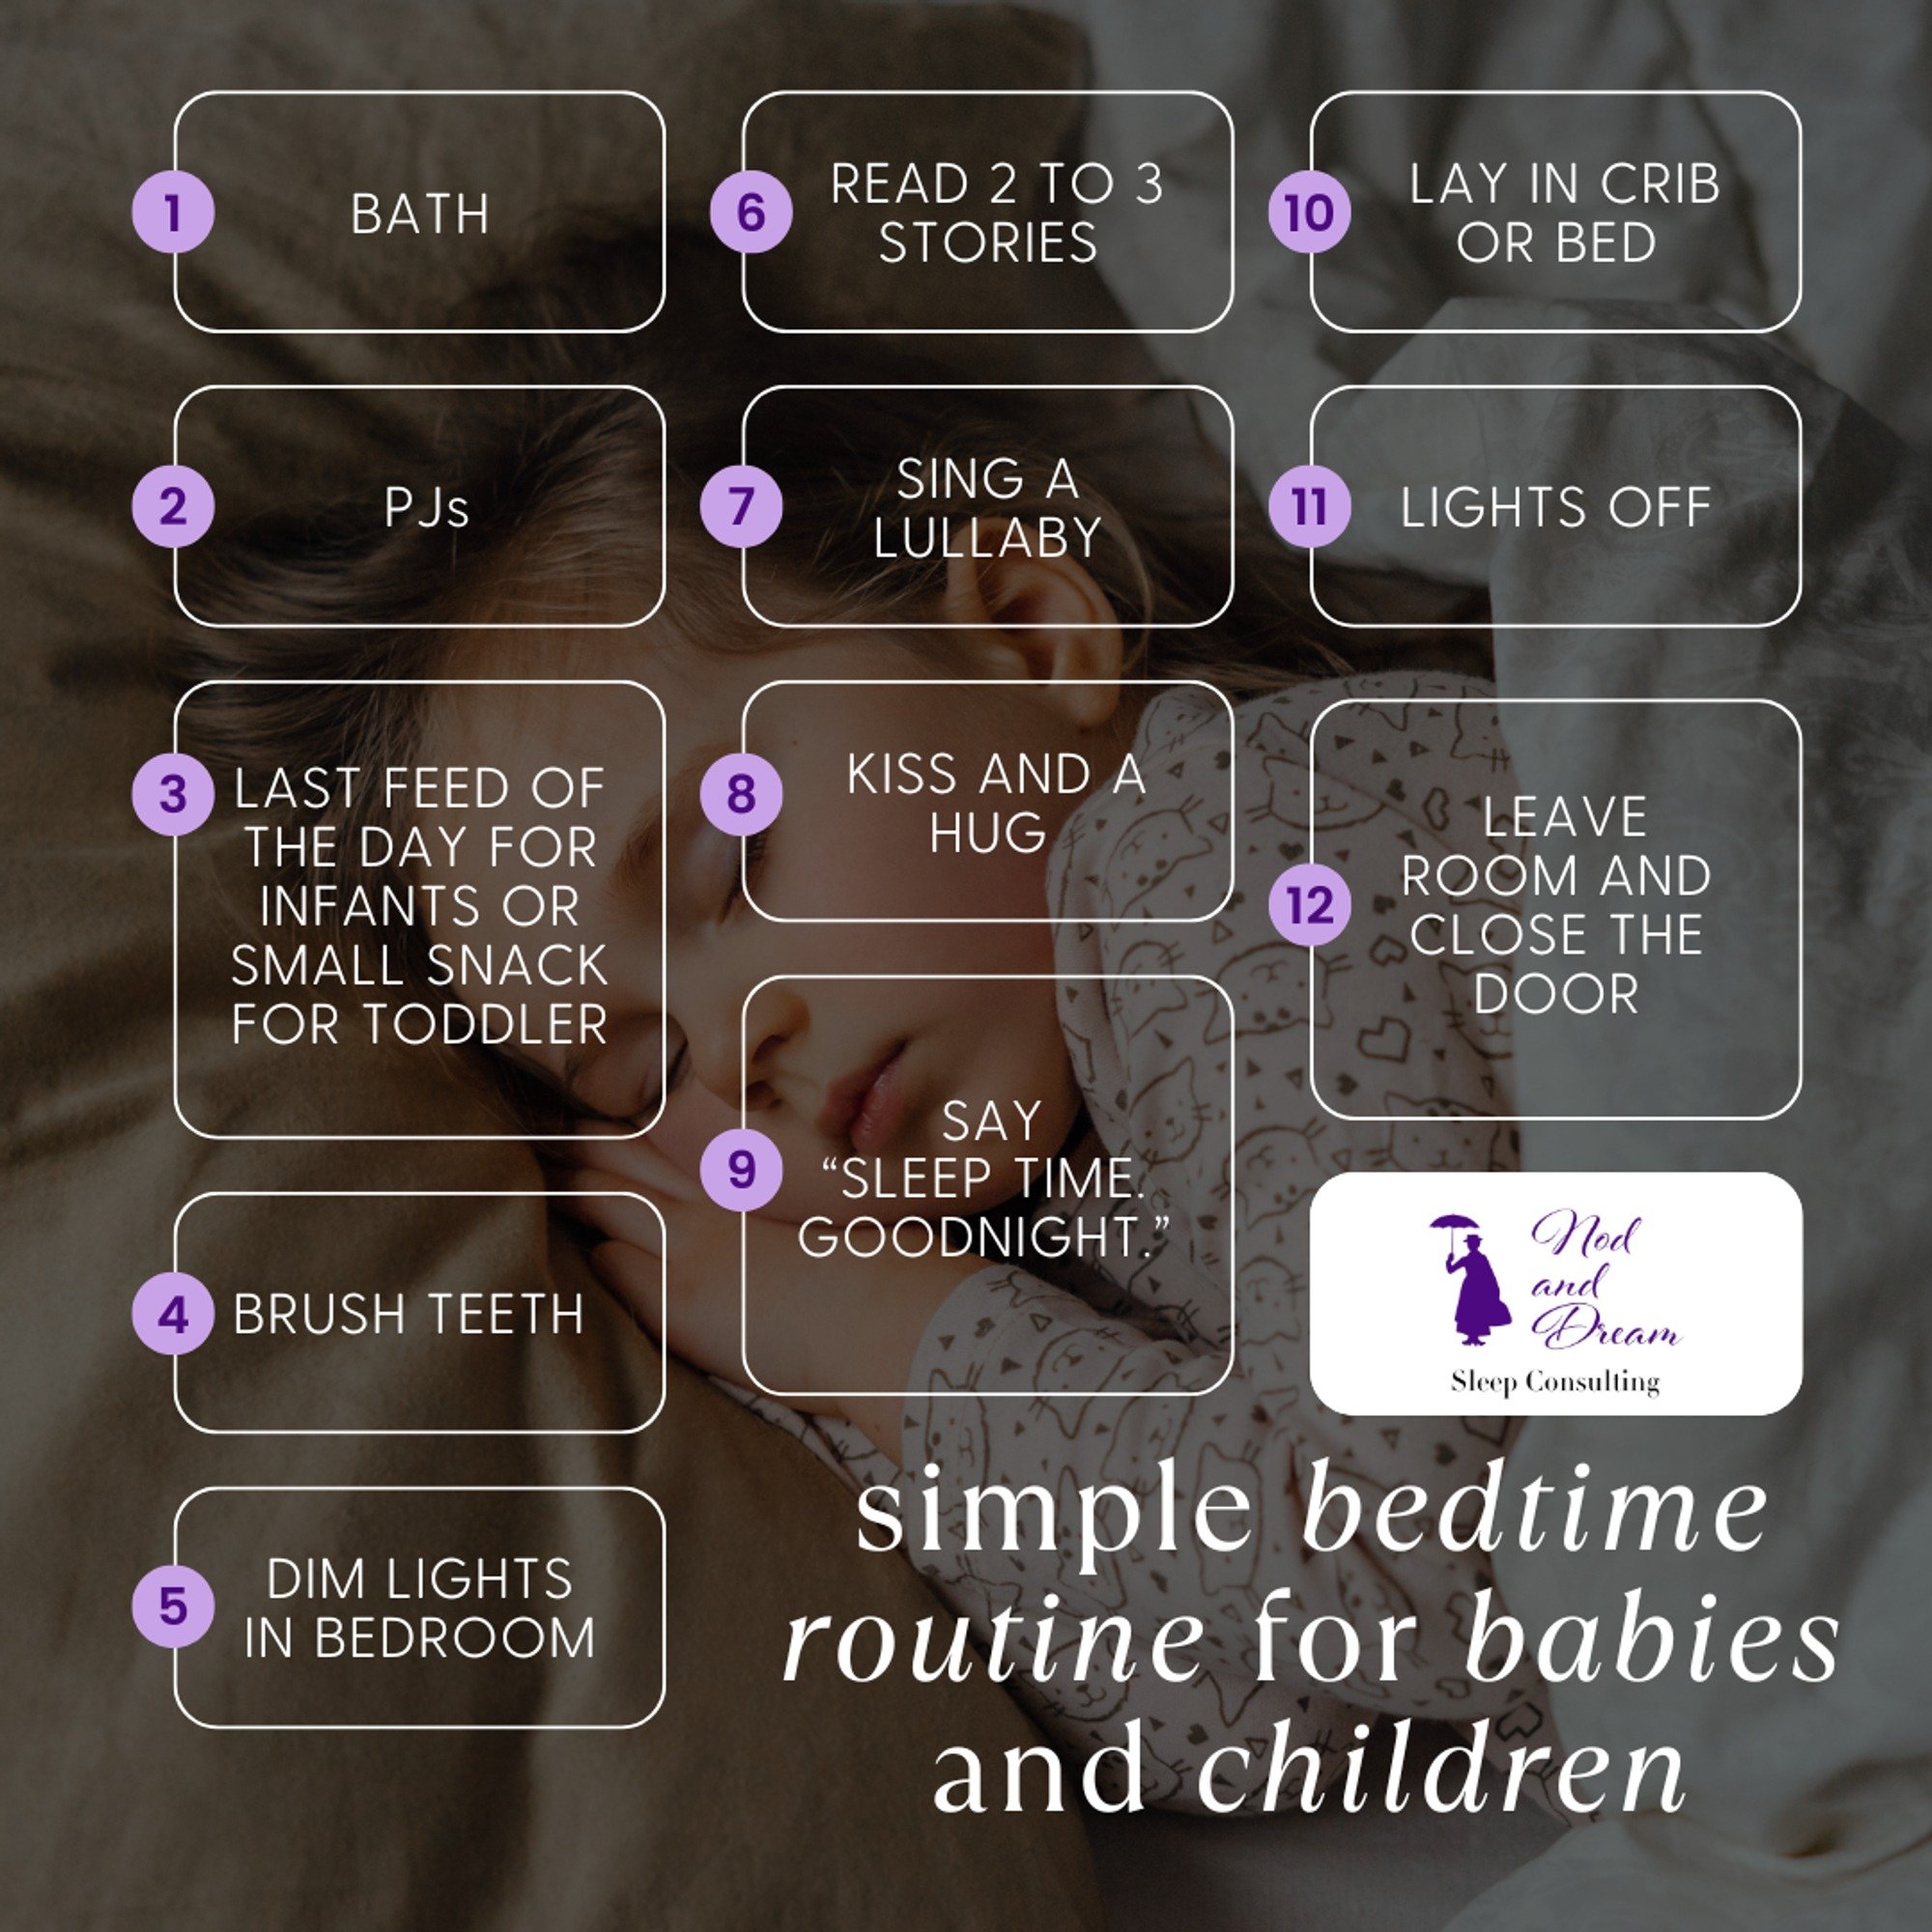 Introducing a simple bedtime routine for your little ones! As a sleep consultant, I've crafted a straightforward yet effective routine to help ease your child into a restful night's sleep. From soothing activities to calming rituals, this bedtime rou